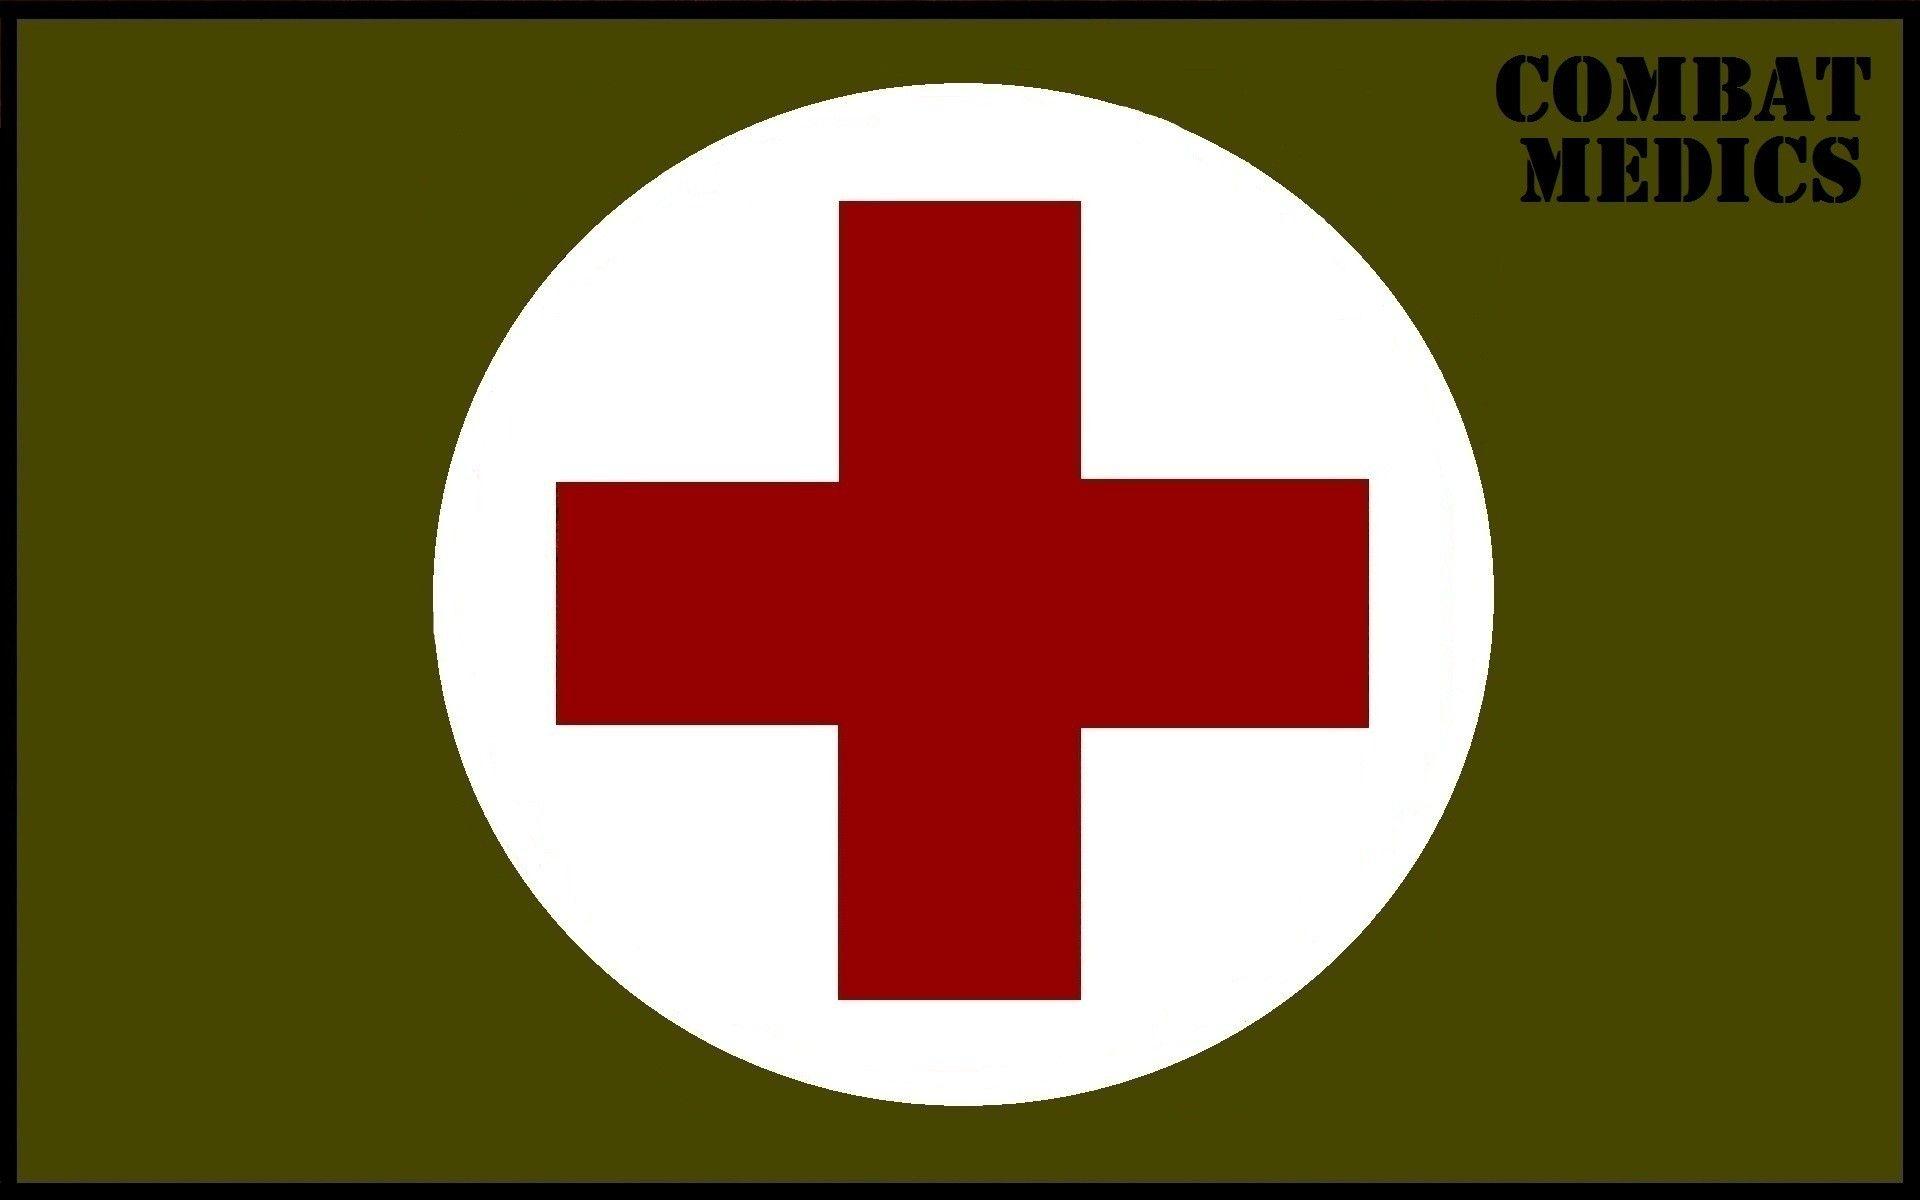 Military Medical Cross Logo - Doctor Symbol Clipart military medical 6 - 1920 X 1200 ...